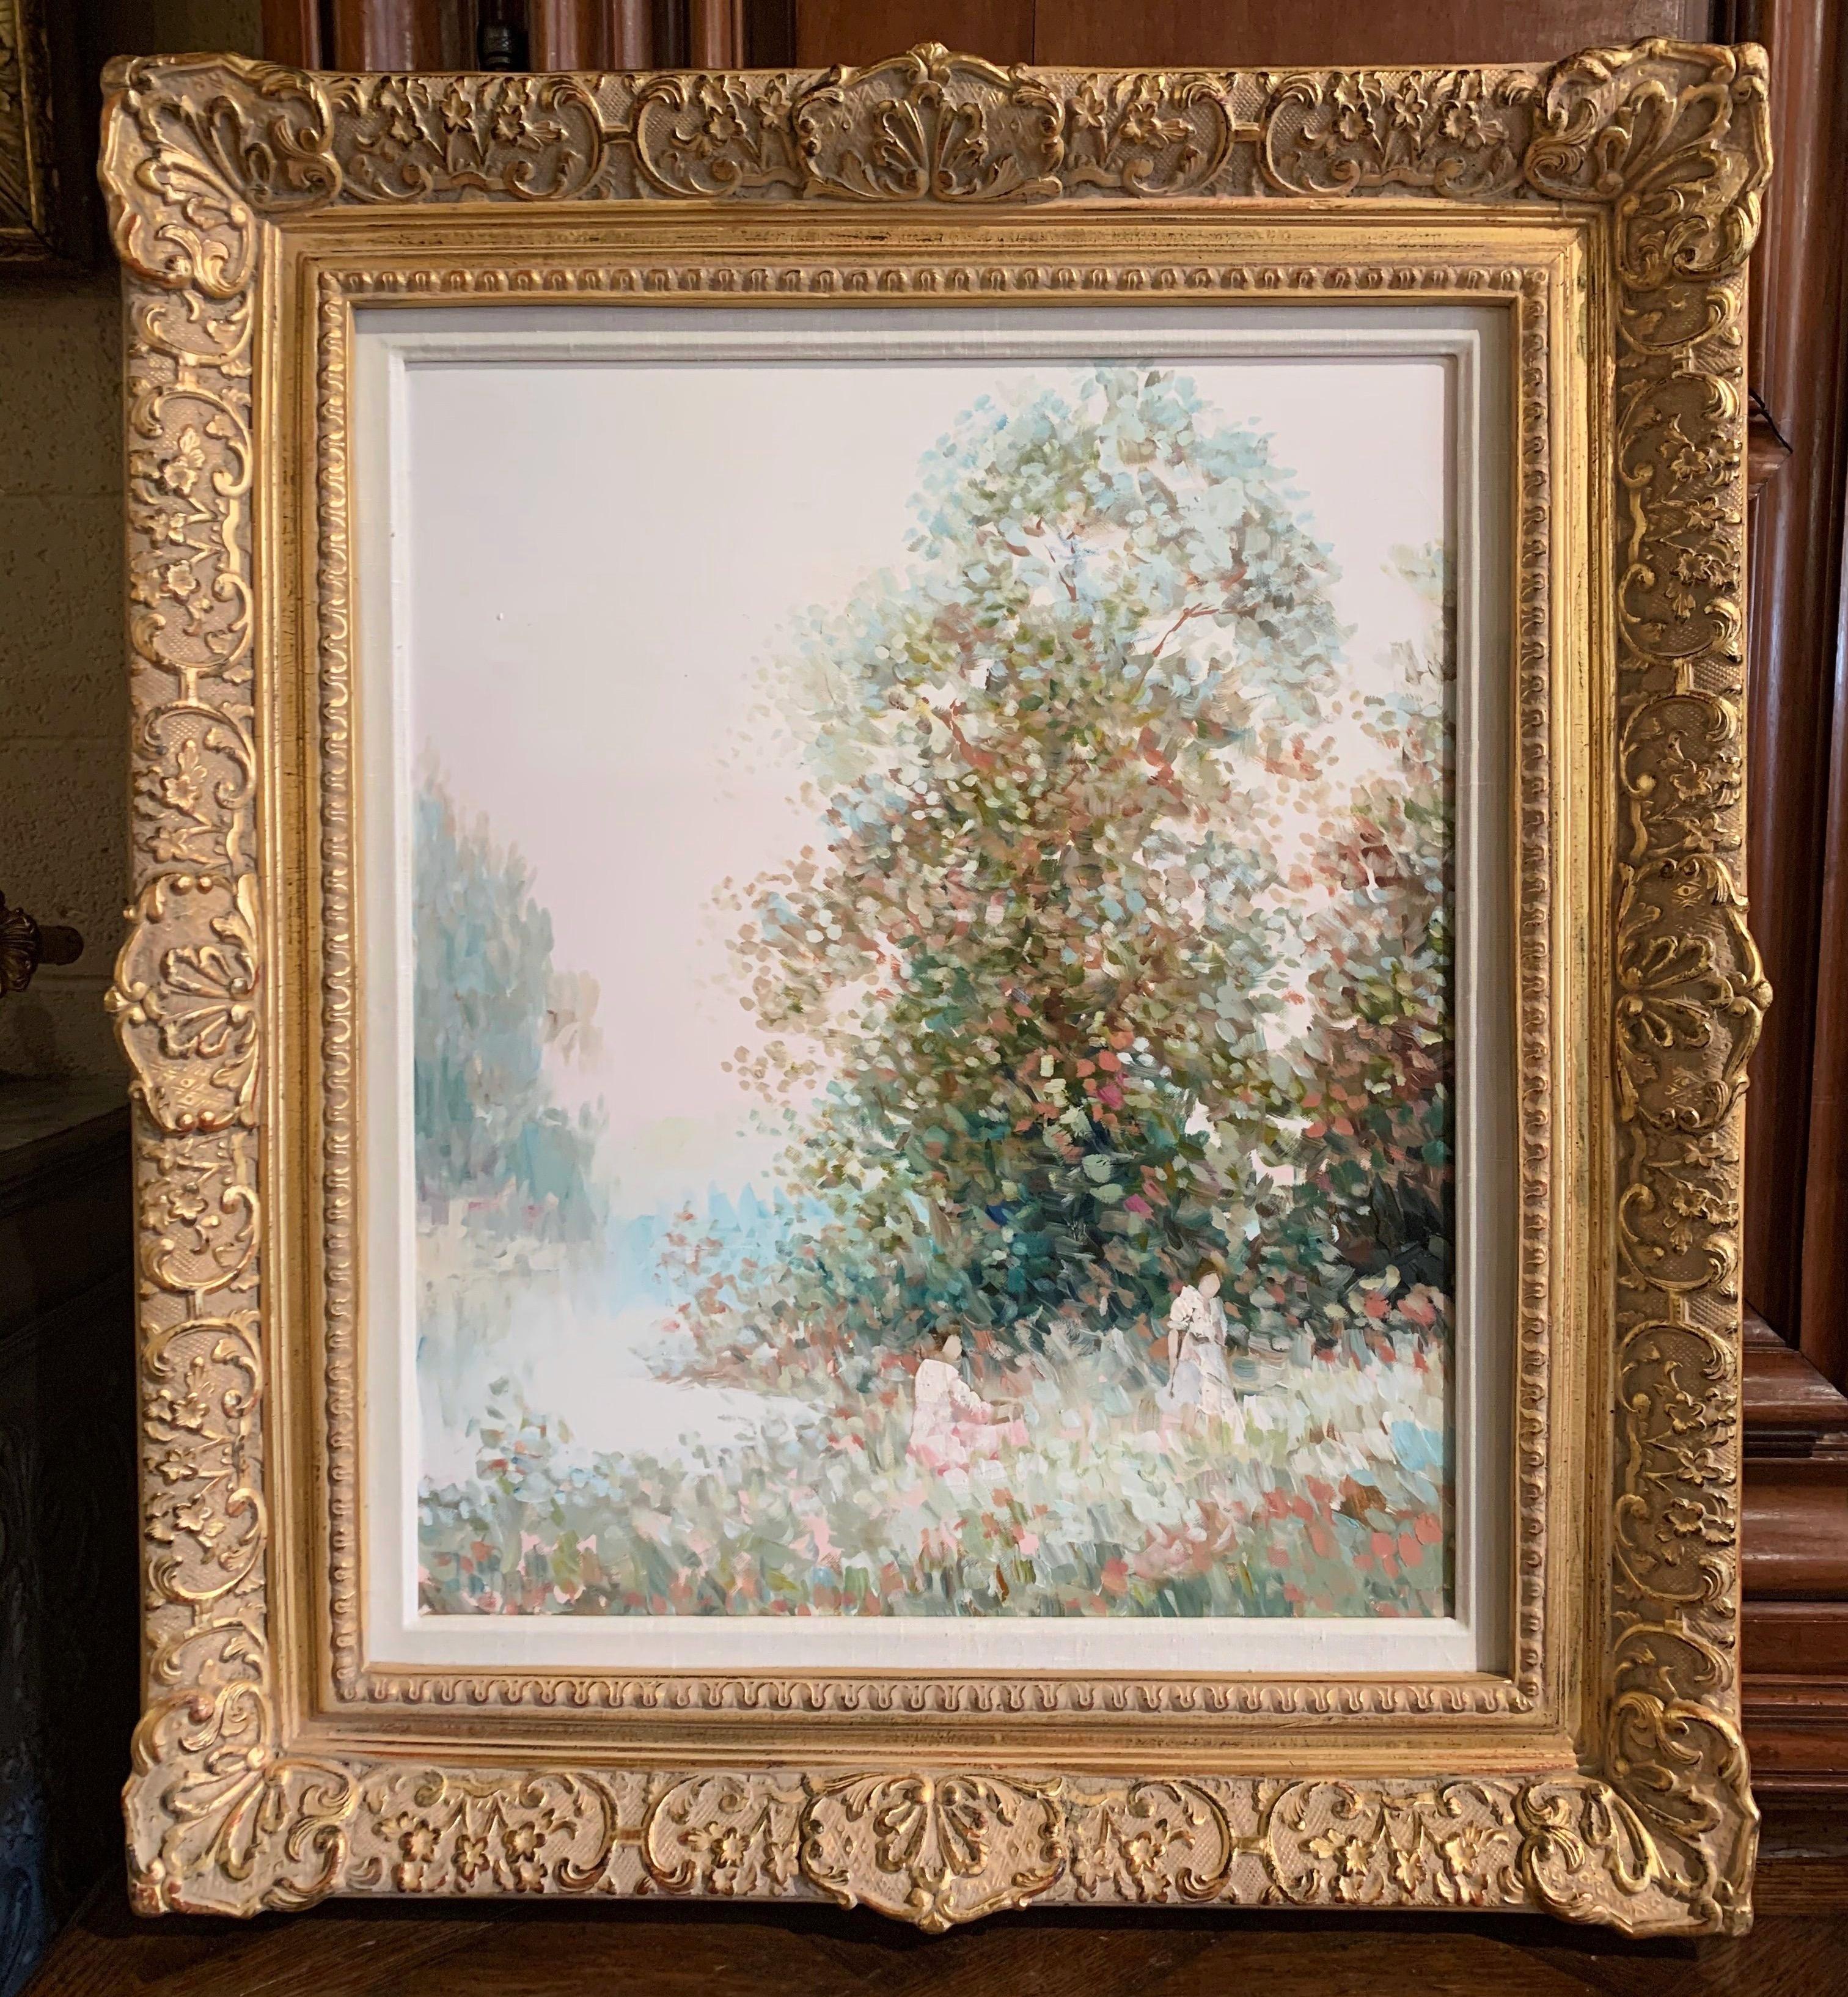 Hand-Carved Signed Impressionistic Oil on Canvas Painting in Carved Gilt Frame